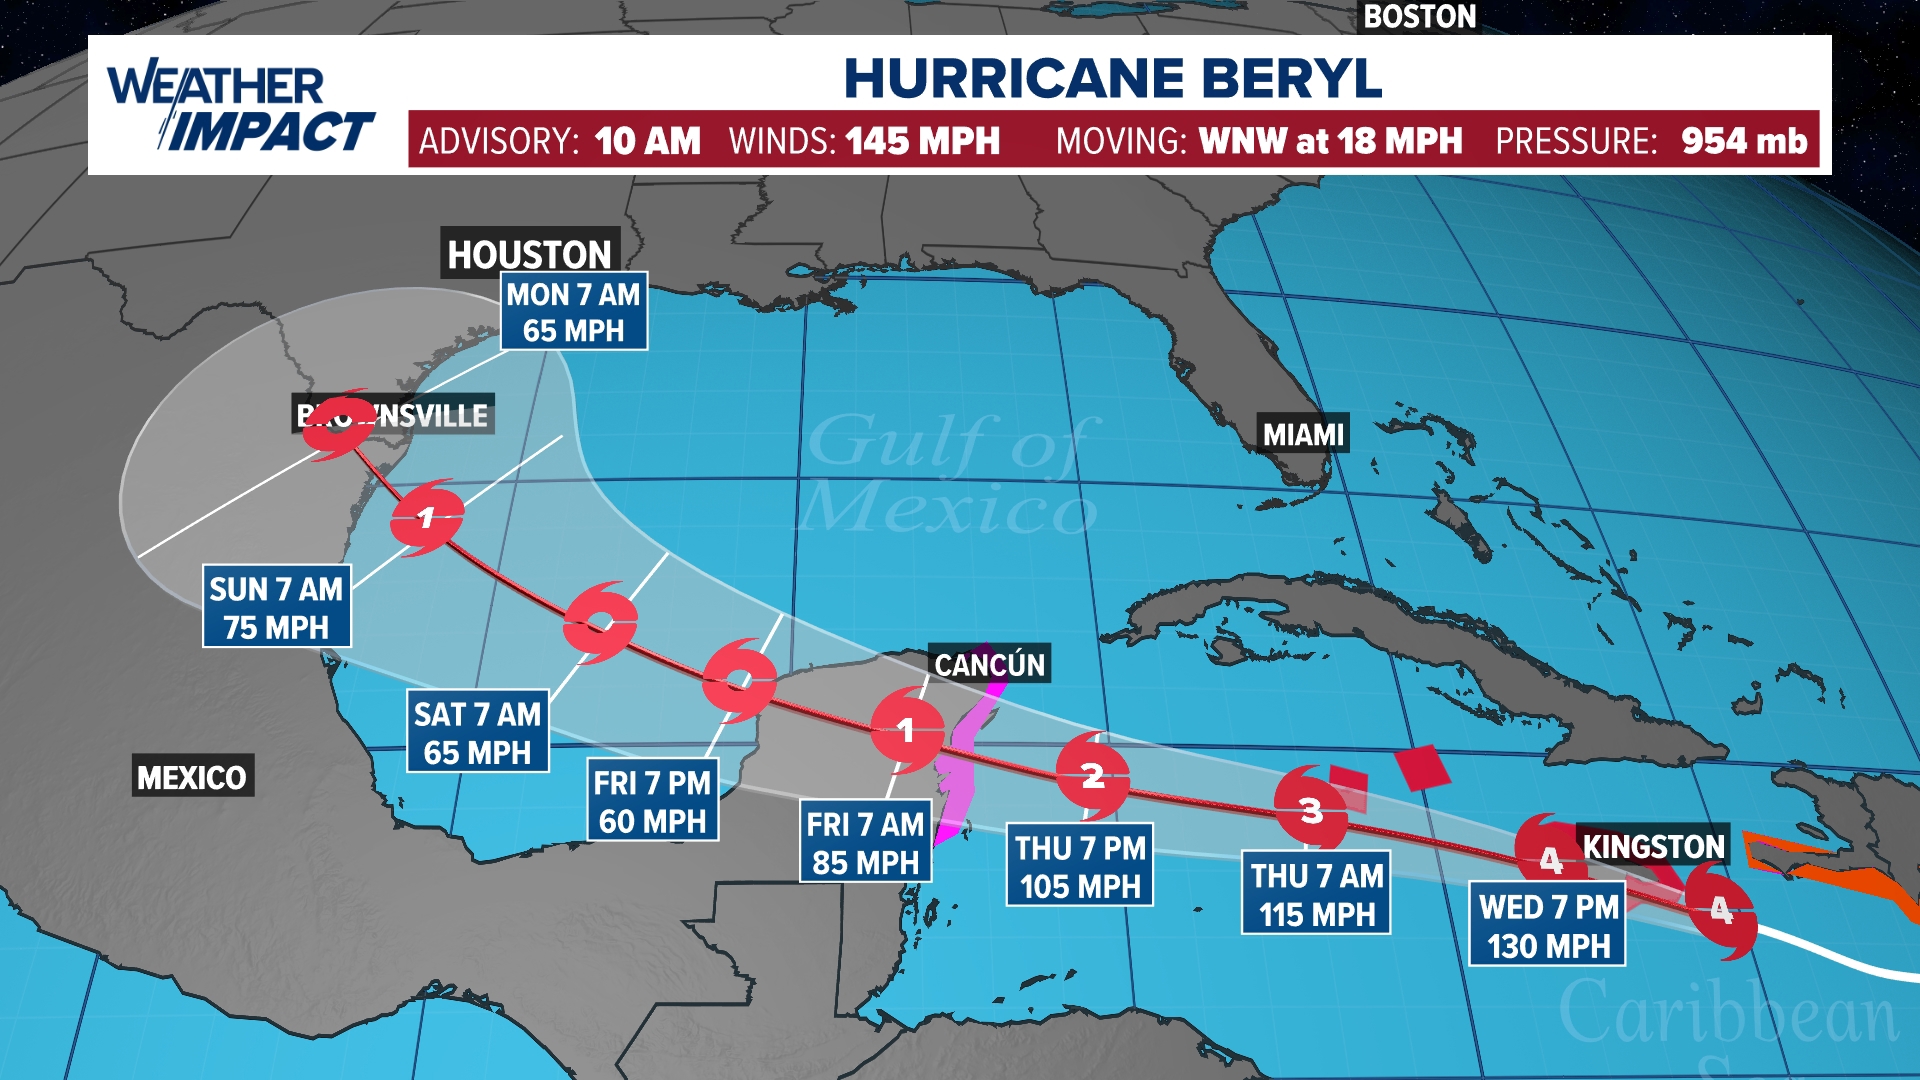 Hurricane Beryl remains a Category 4 storm as it approaches Jamaica Wednesday morning.